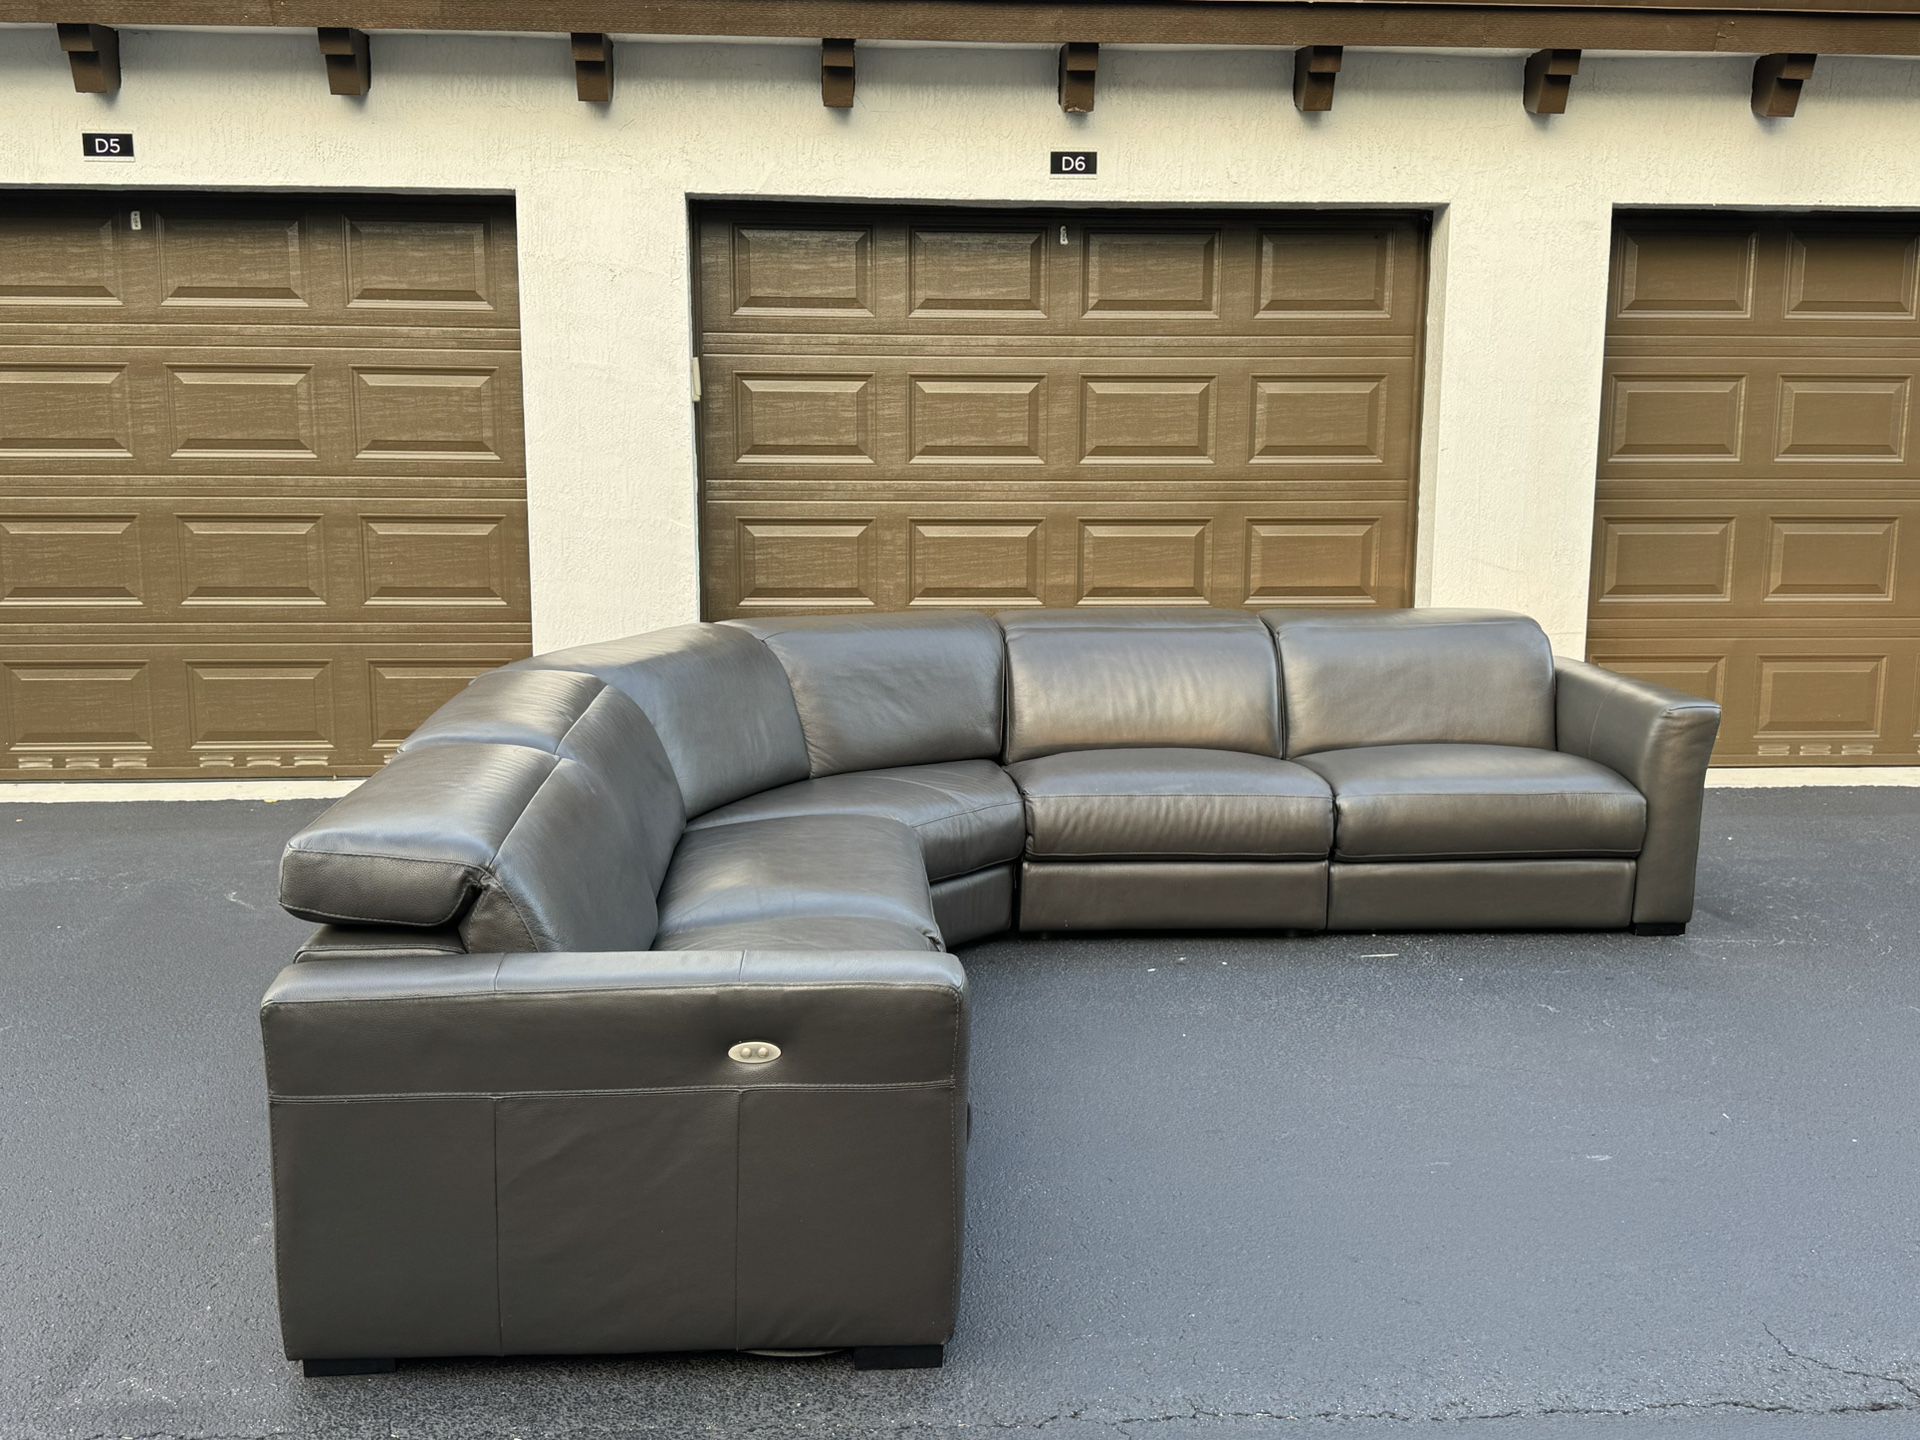 Sofa/Couch Sectional Recliners - Gray - Leather - Chateau d’ax - Delivery Available 🚛